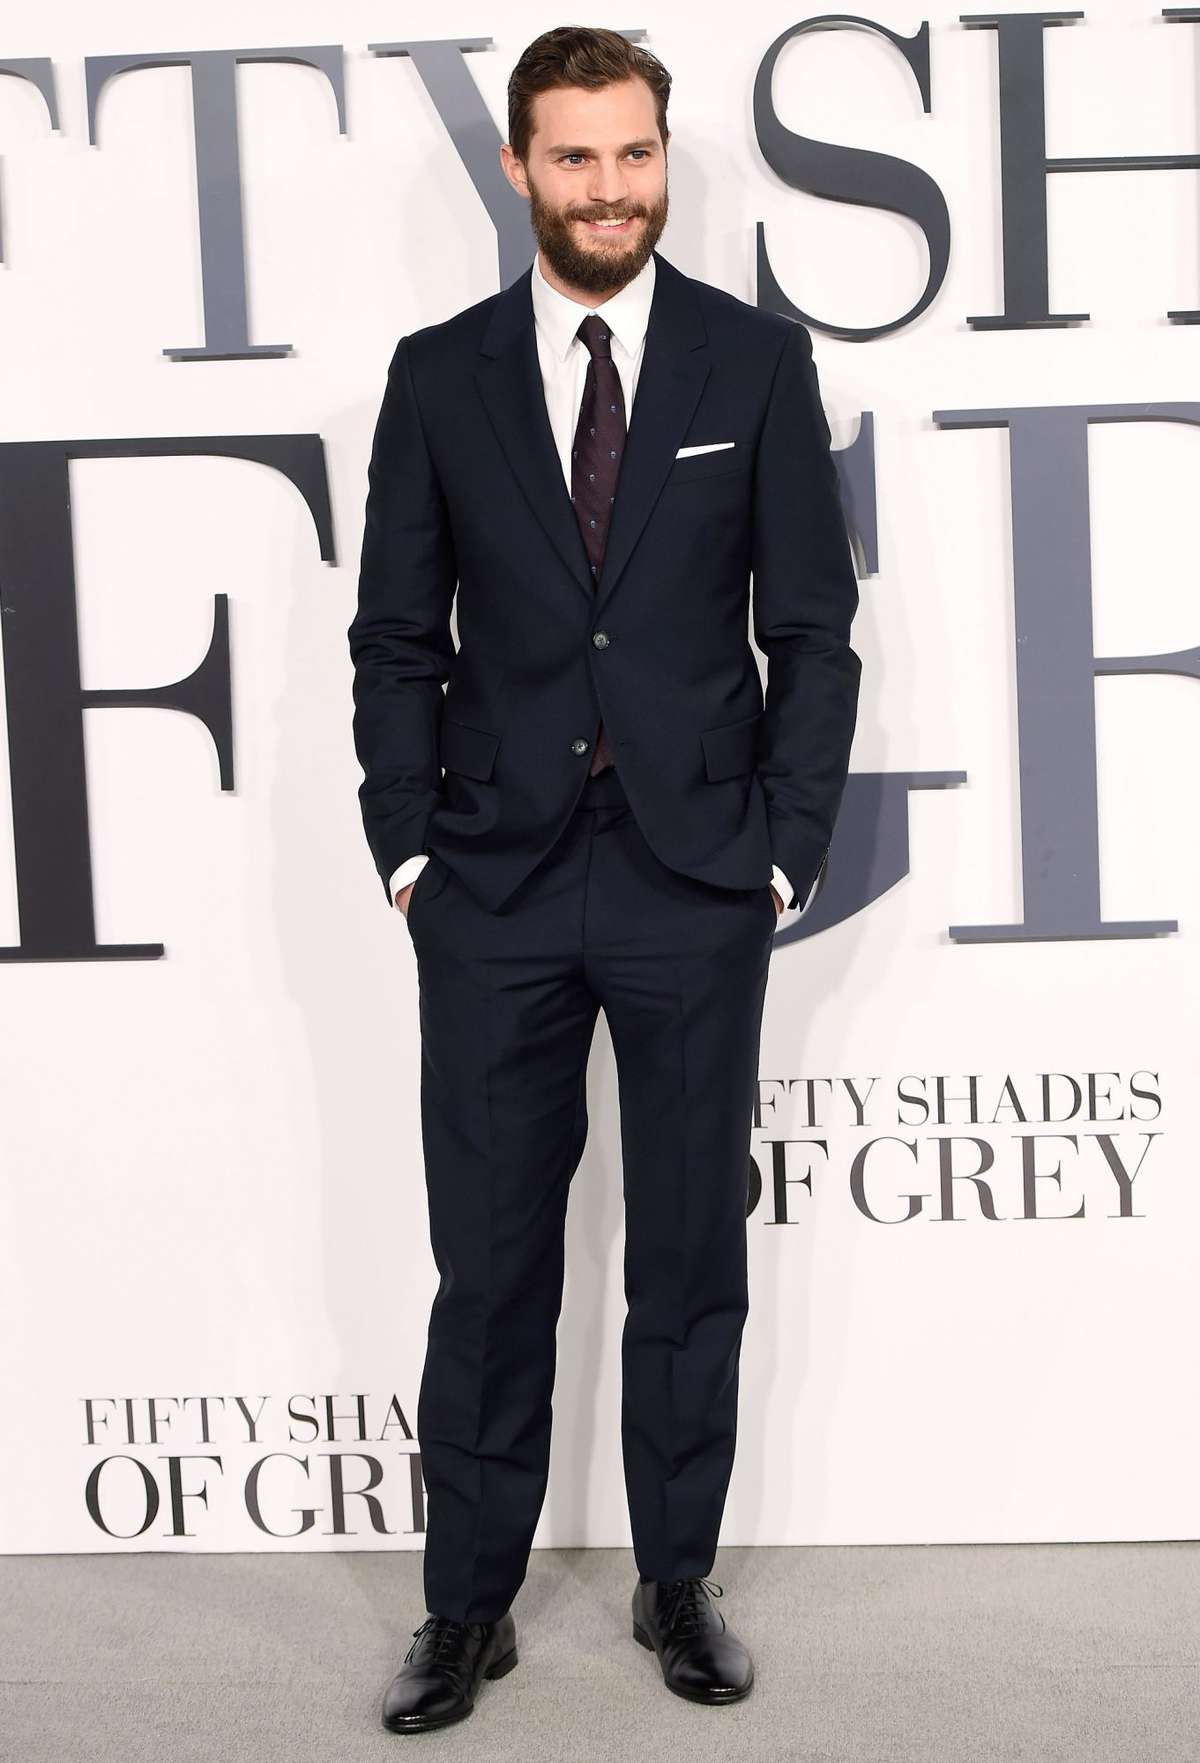 At the U.K. premiere of Fifty Shades